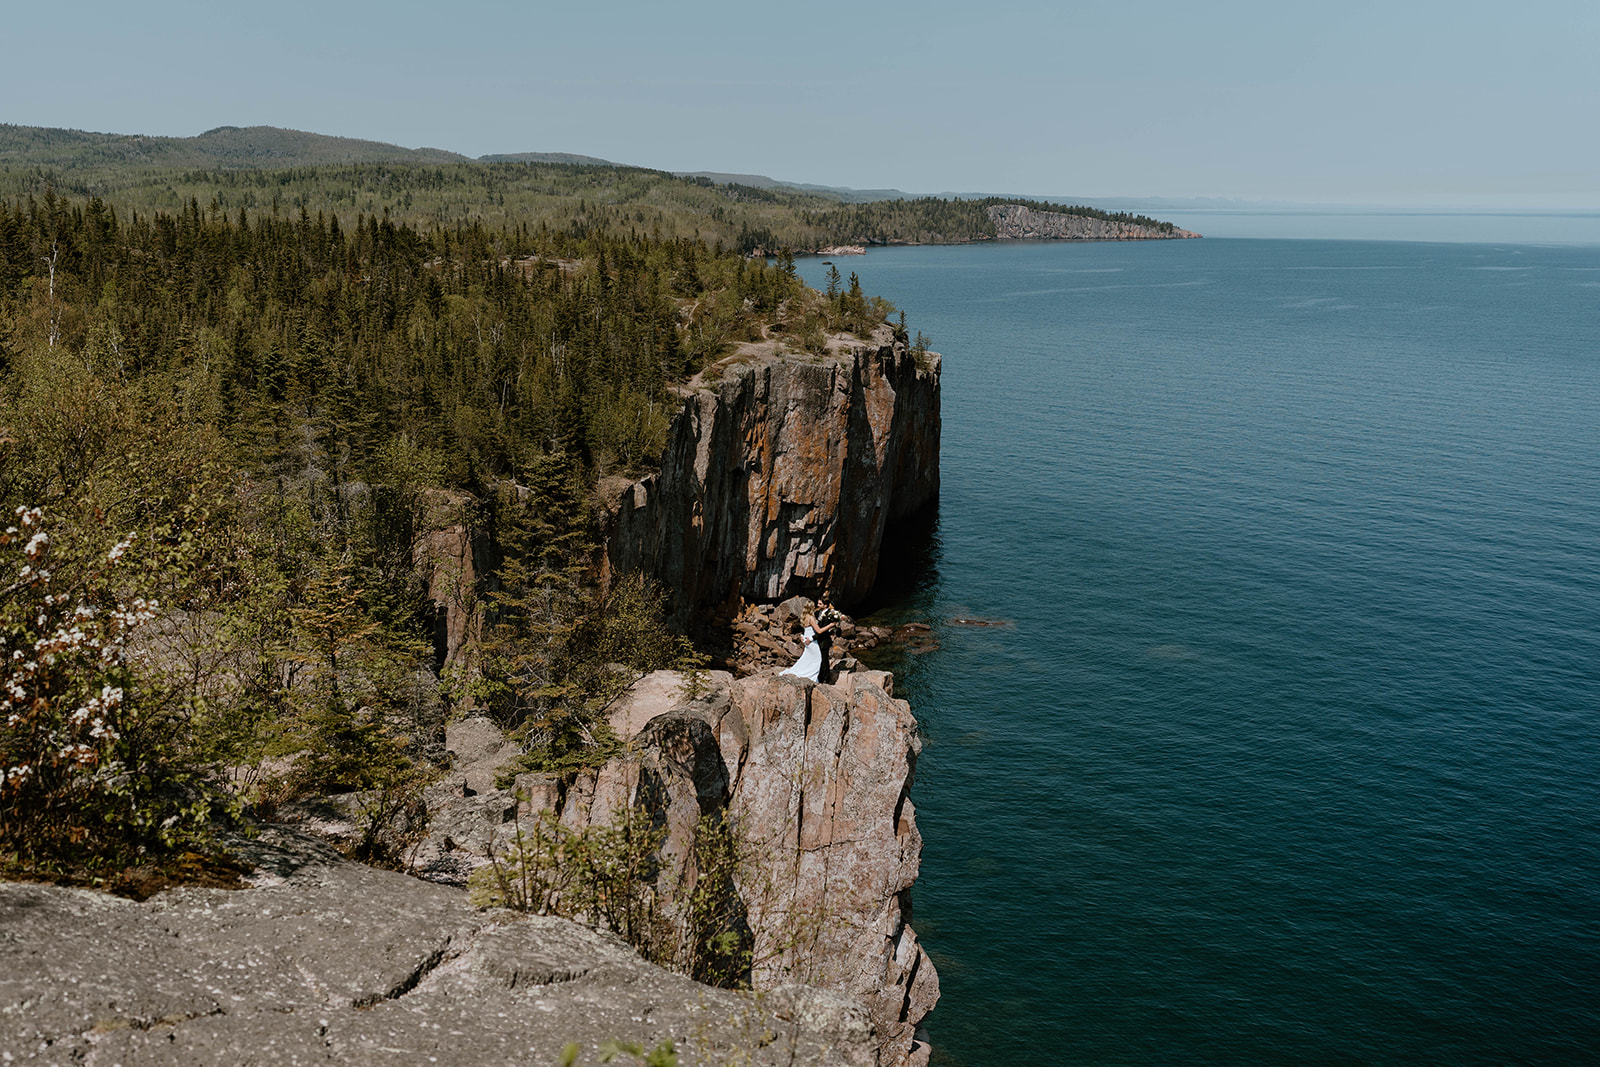 A couple who eloped at Black Beach, MN to say their vows in front of Lake Superior